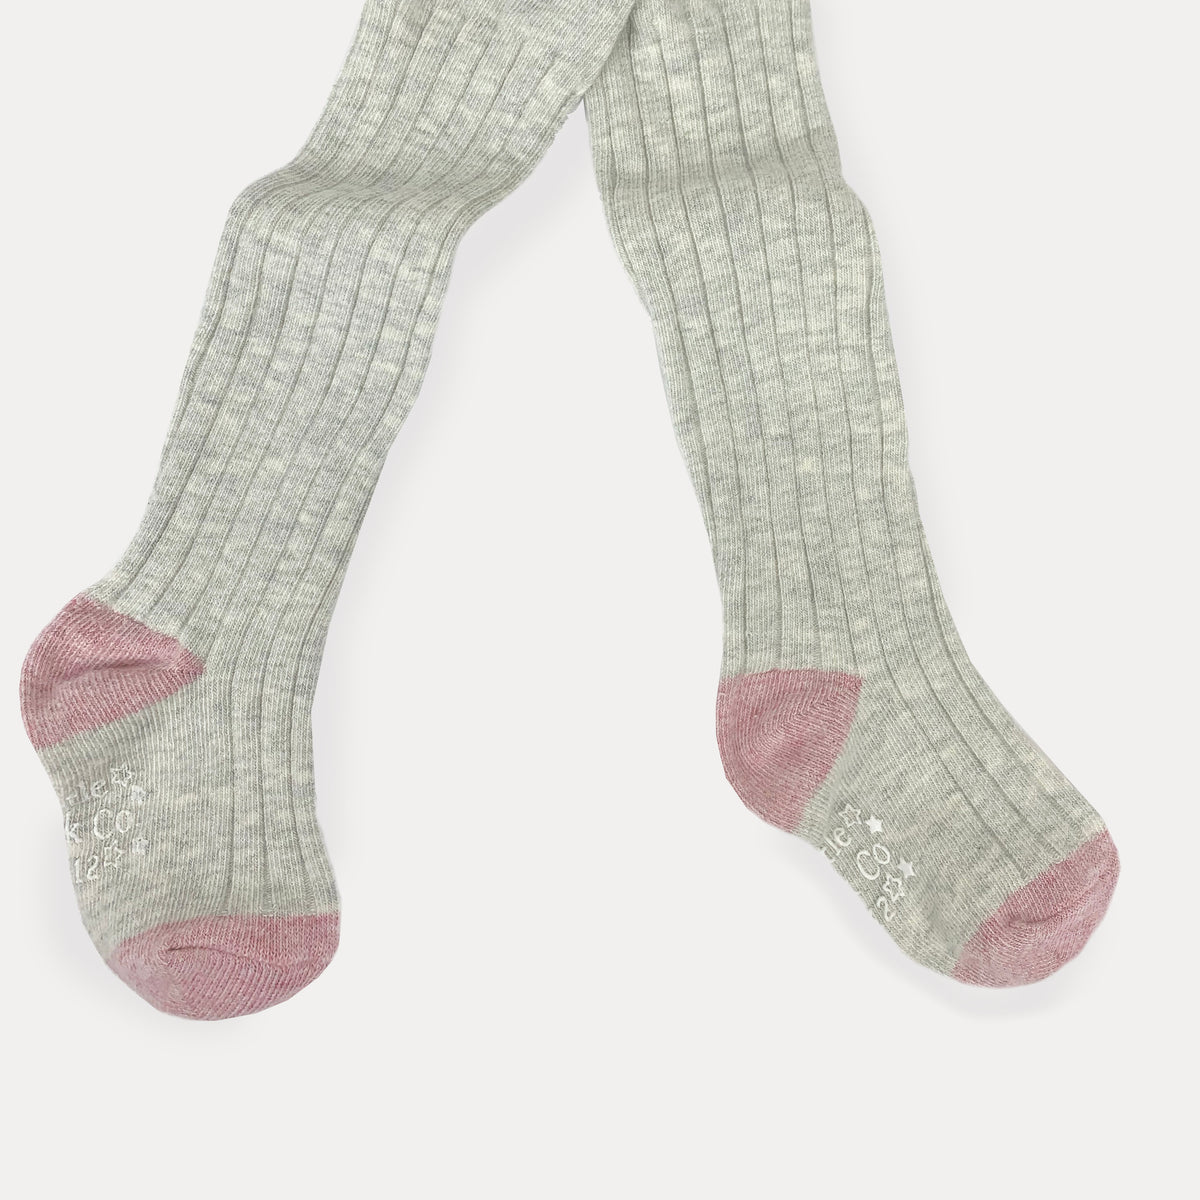 Non-Slip Super Soft Ribbed Baby and Toddler Tights - 2 Pack in Grey Marl & Dusty Pink